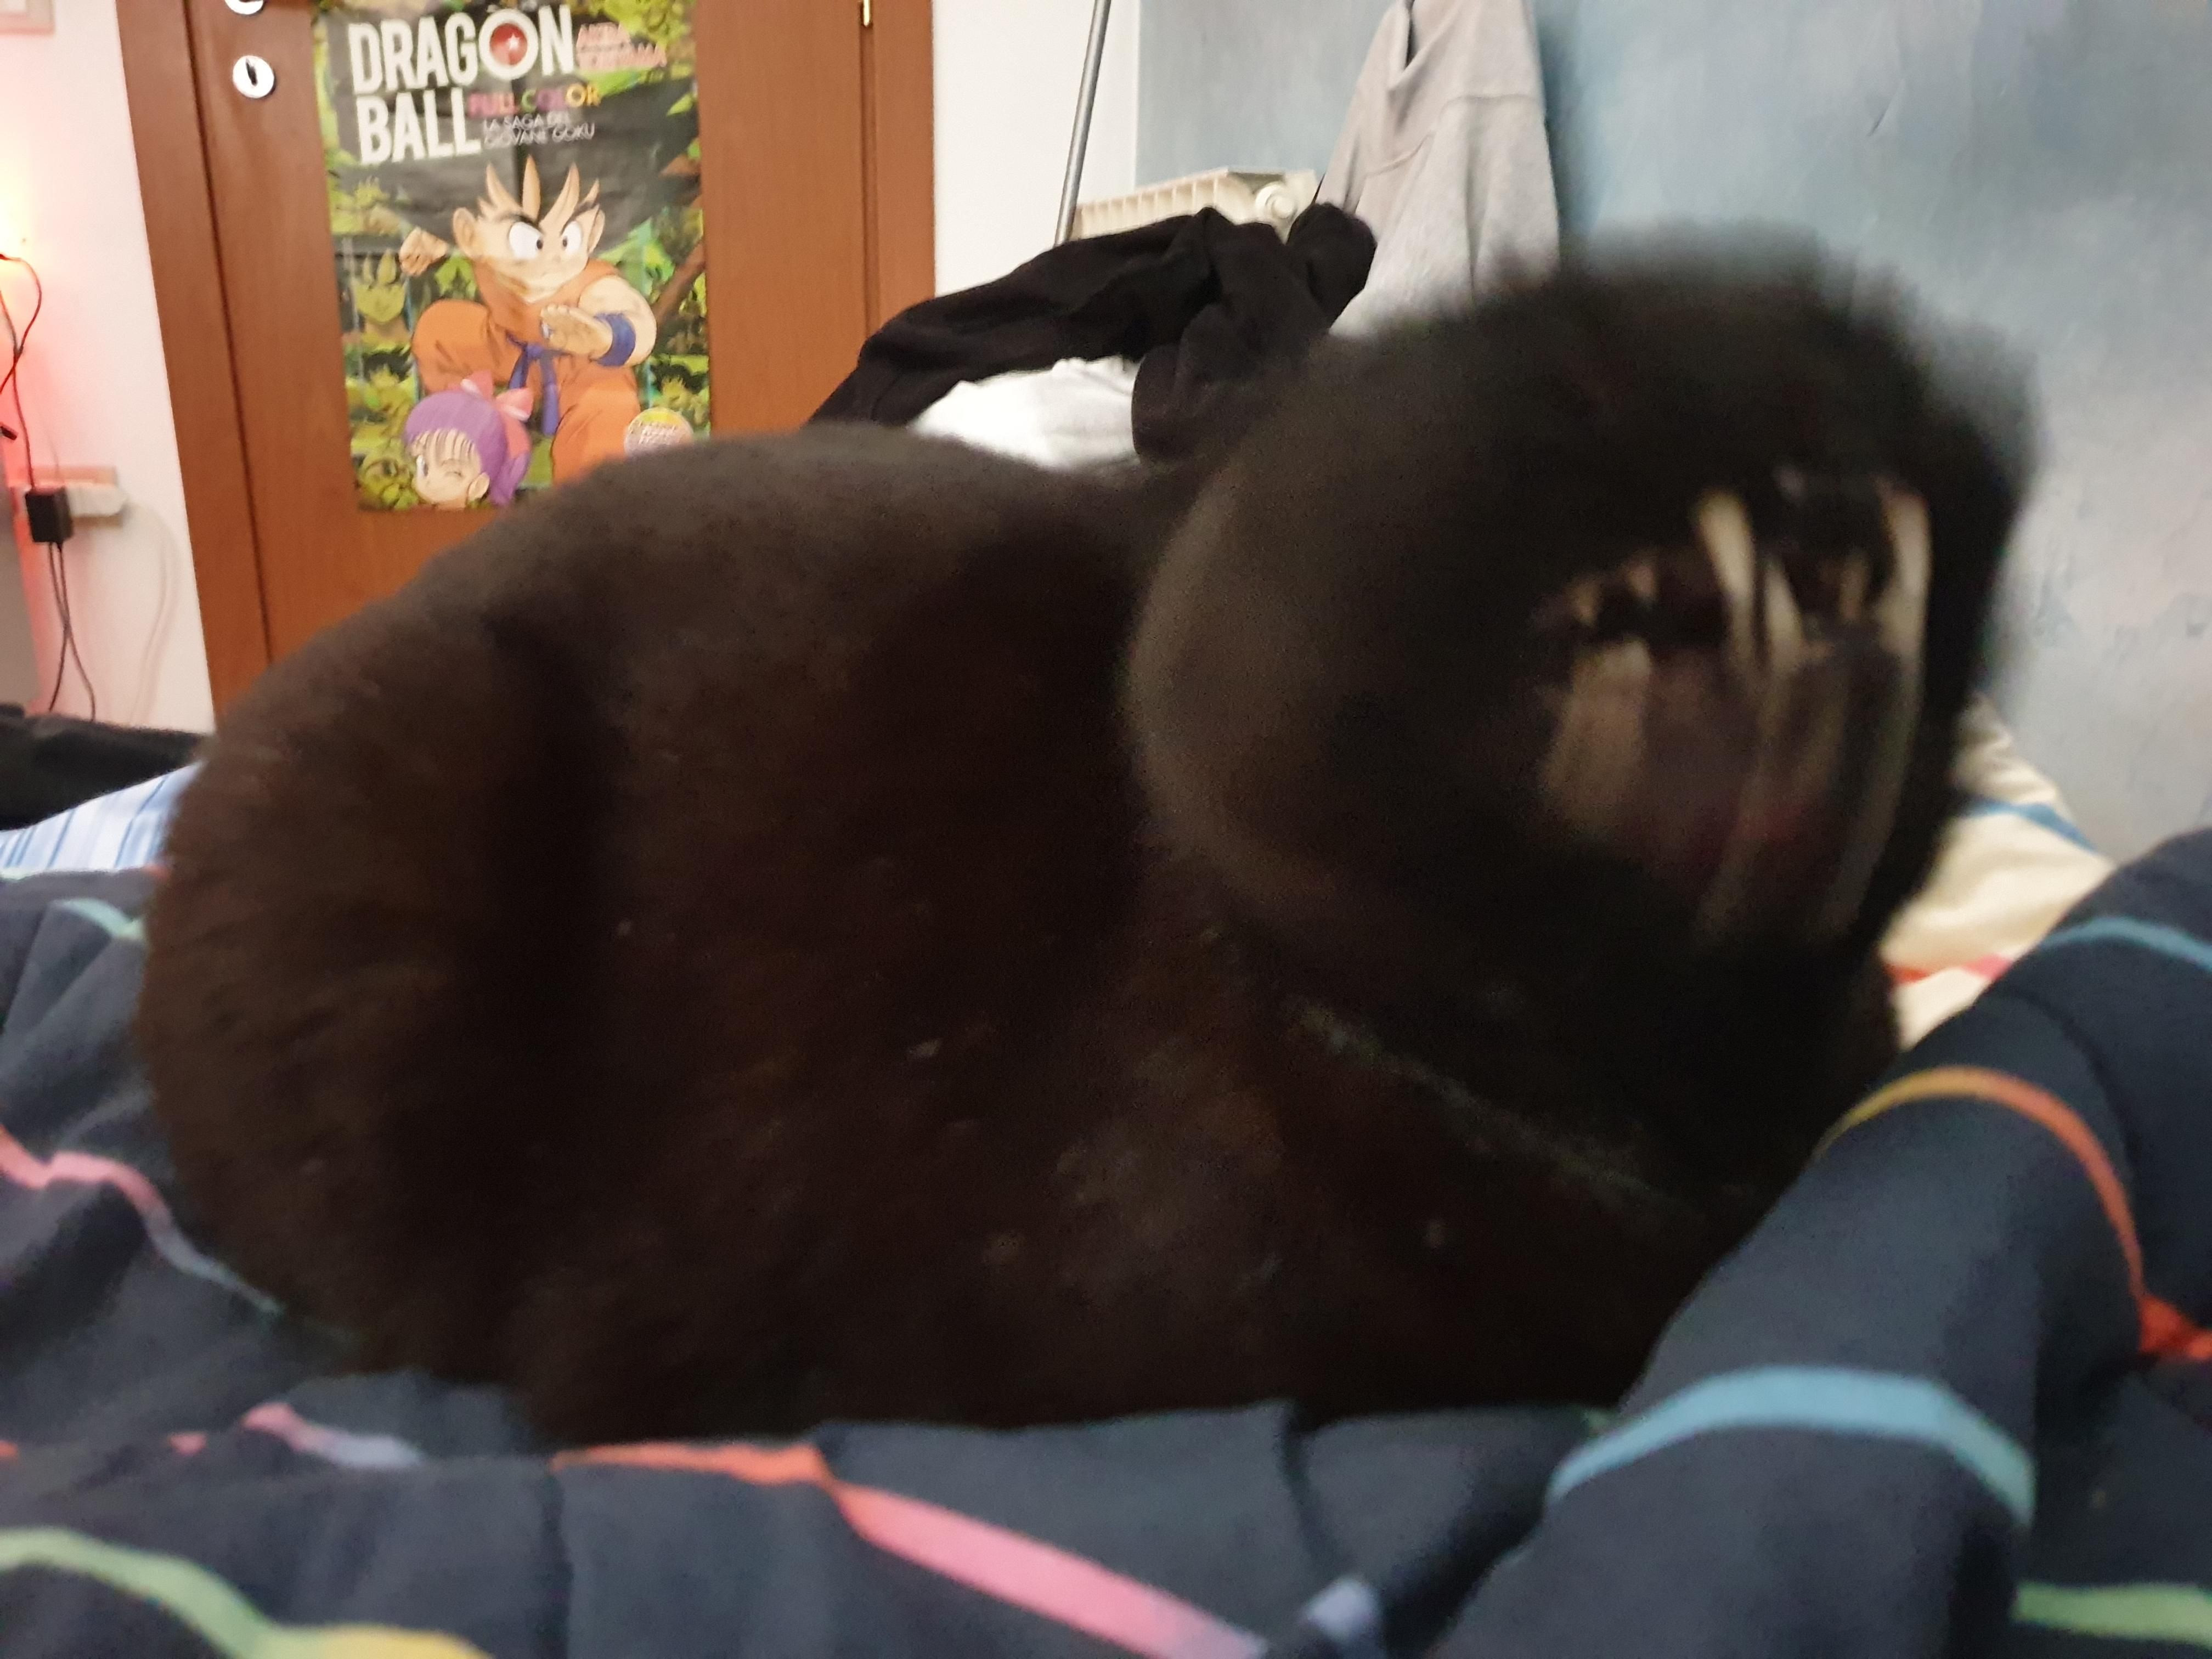 My cat sneezed while i was trying to take a photo.